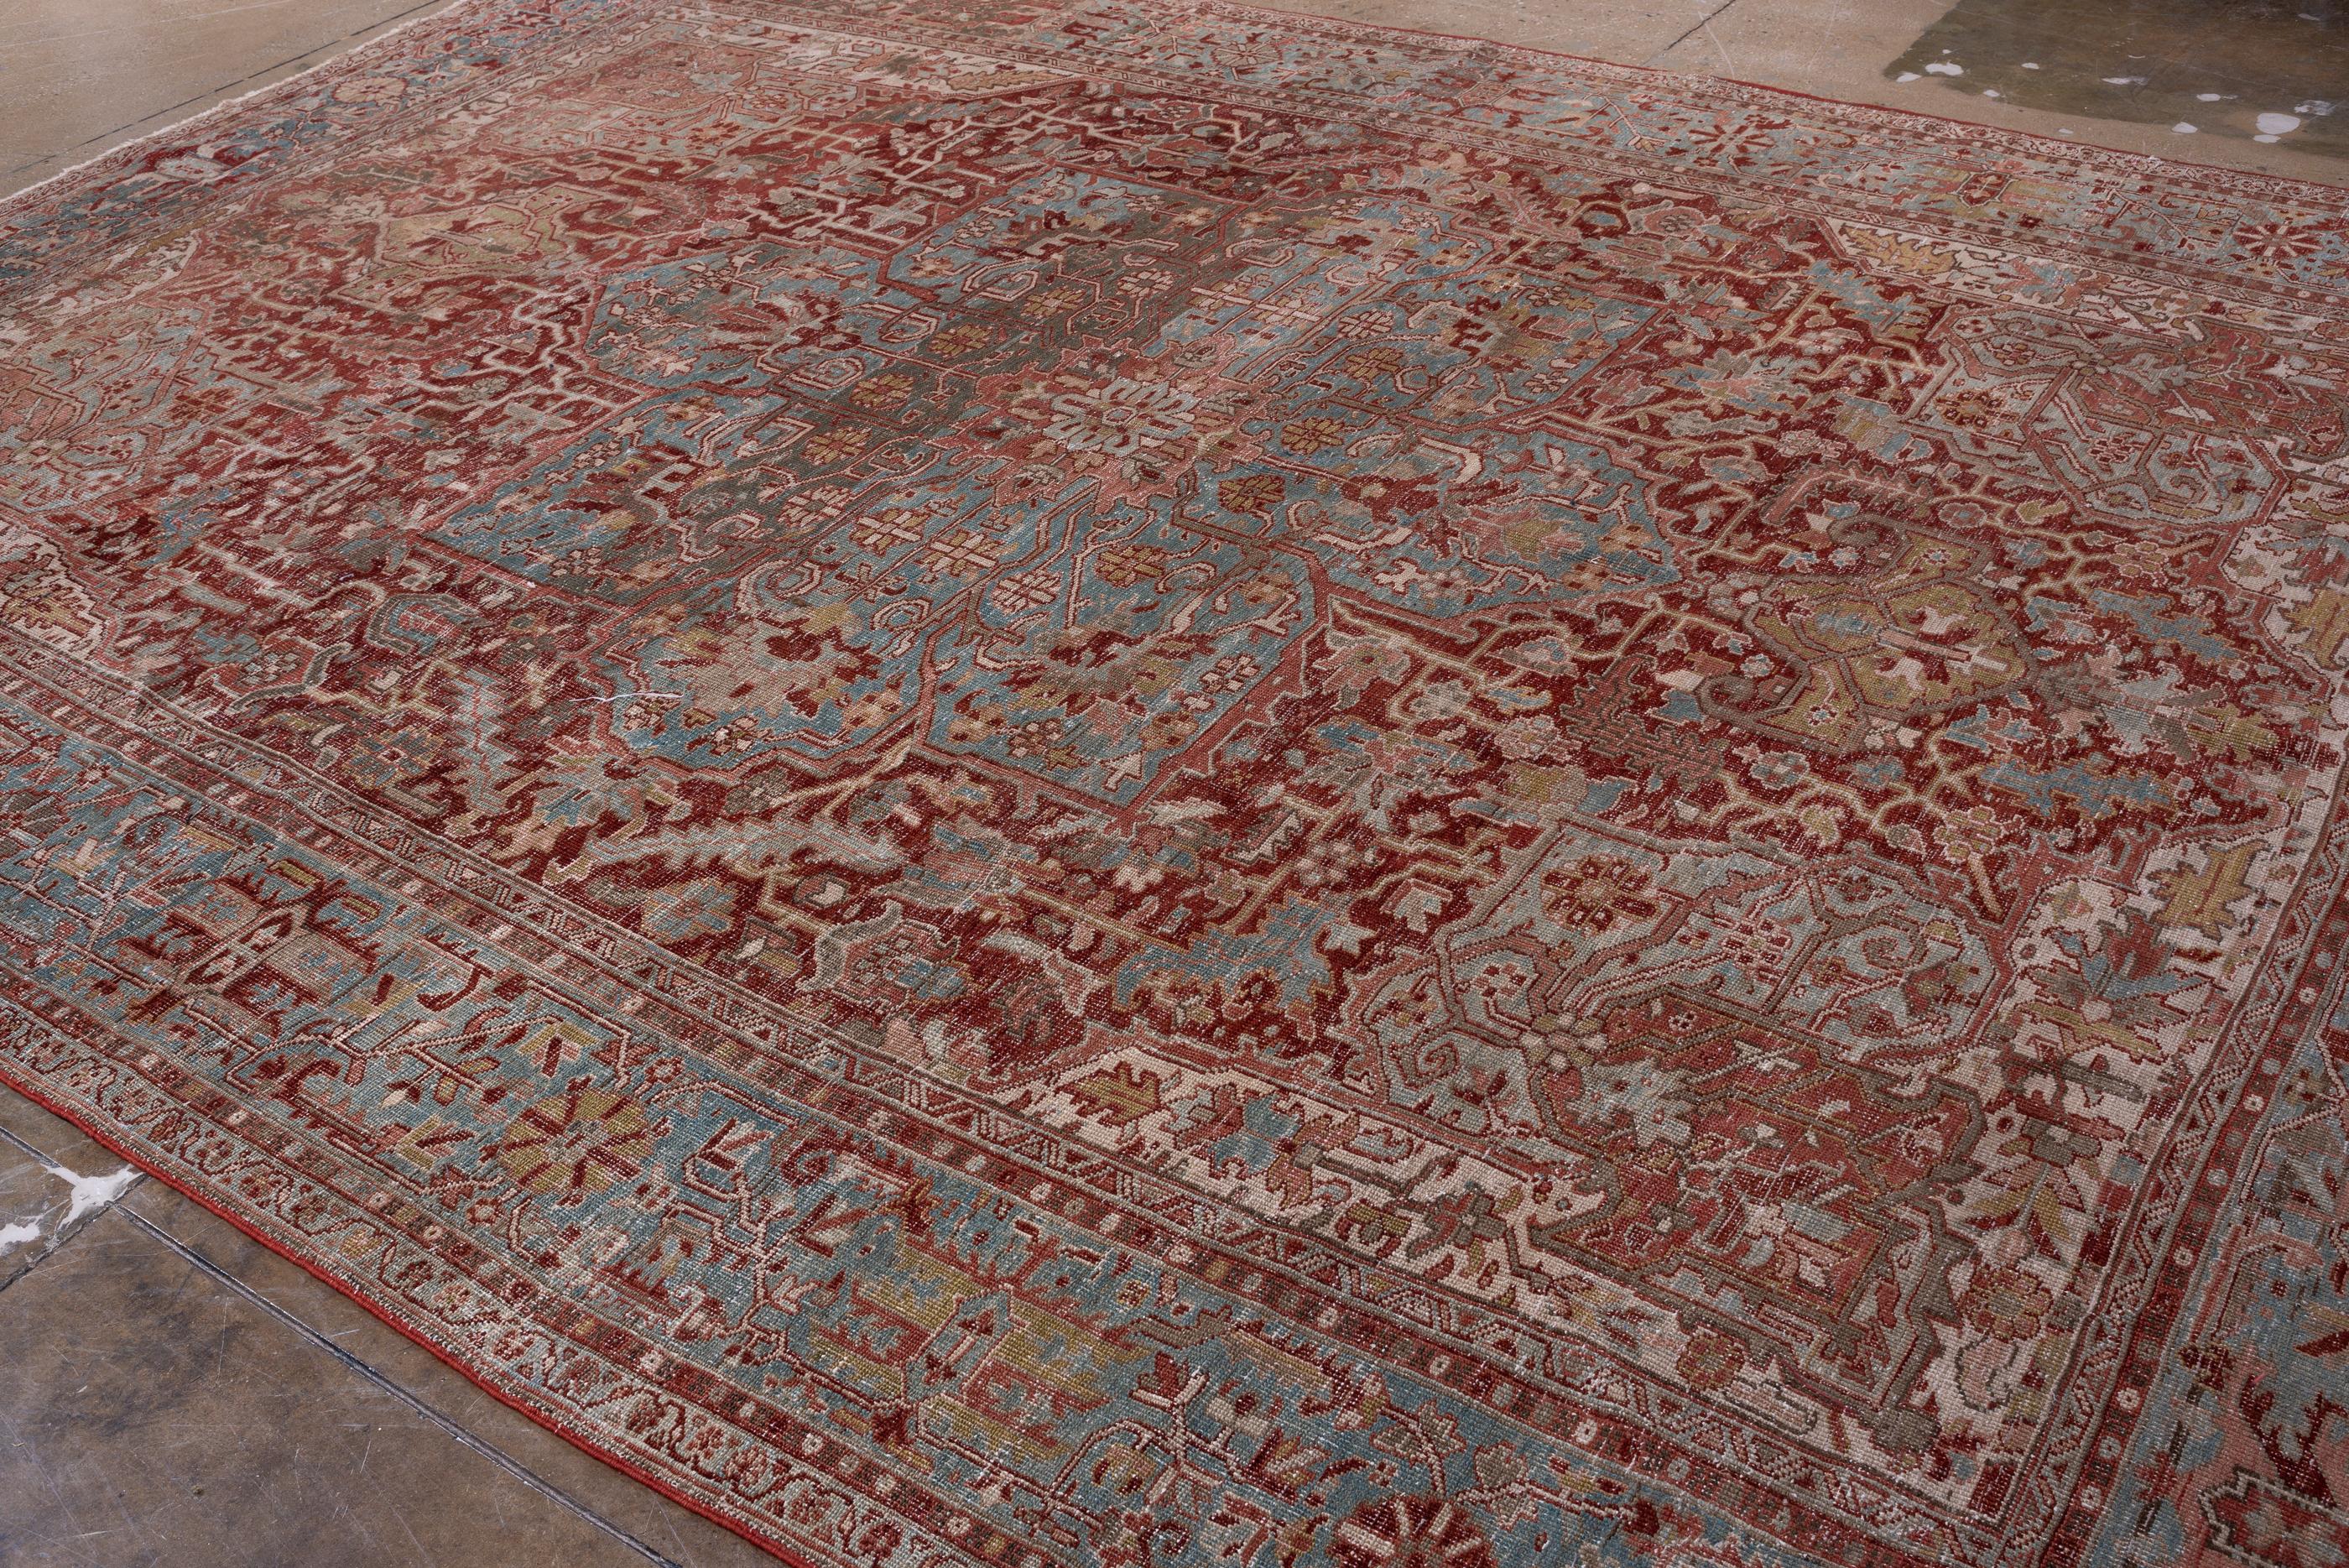 Antique Room-Size Heriz Rug with Red Field and Teal Medallion 1